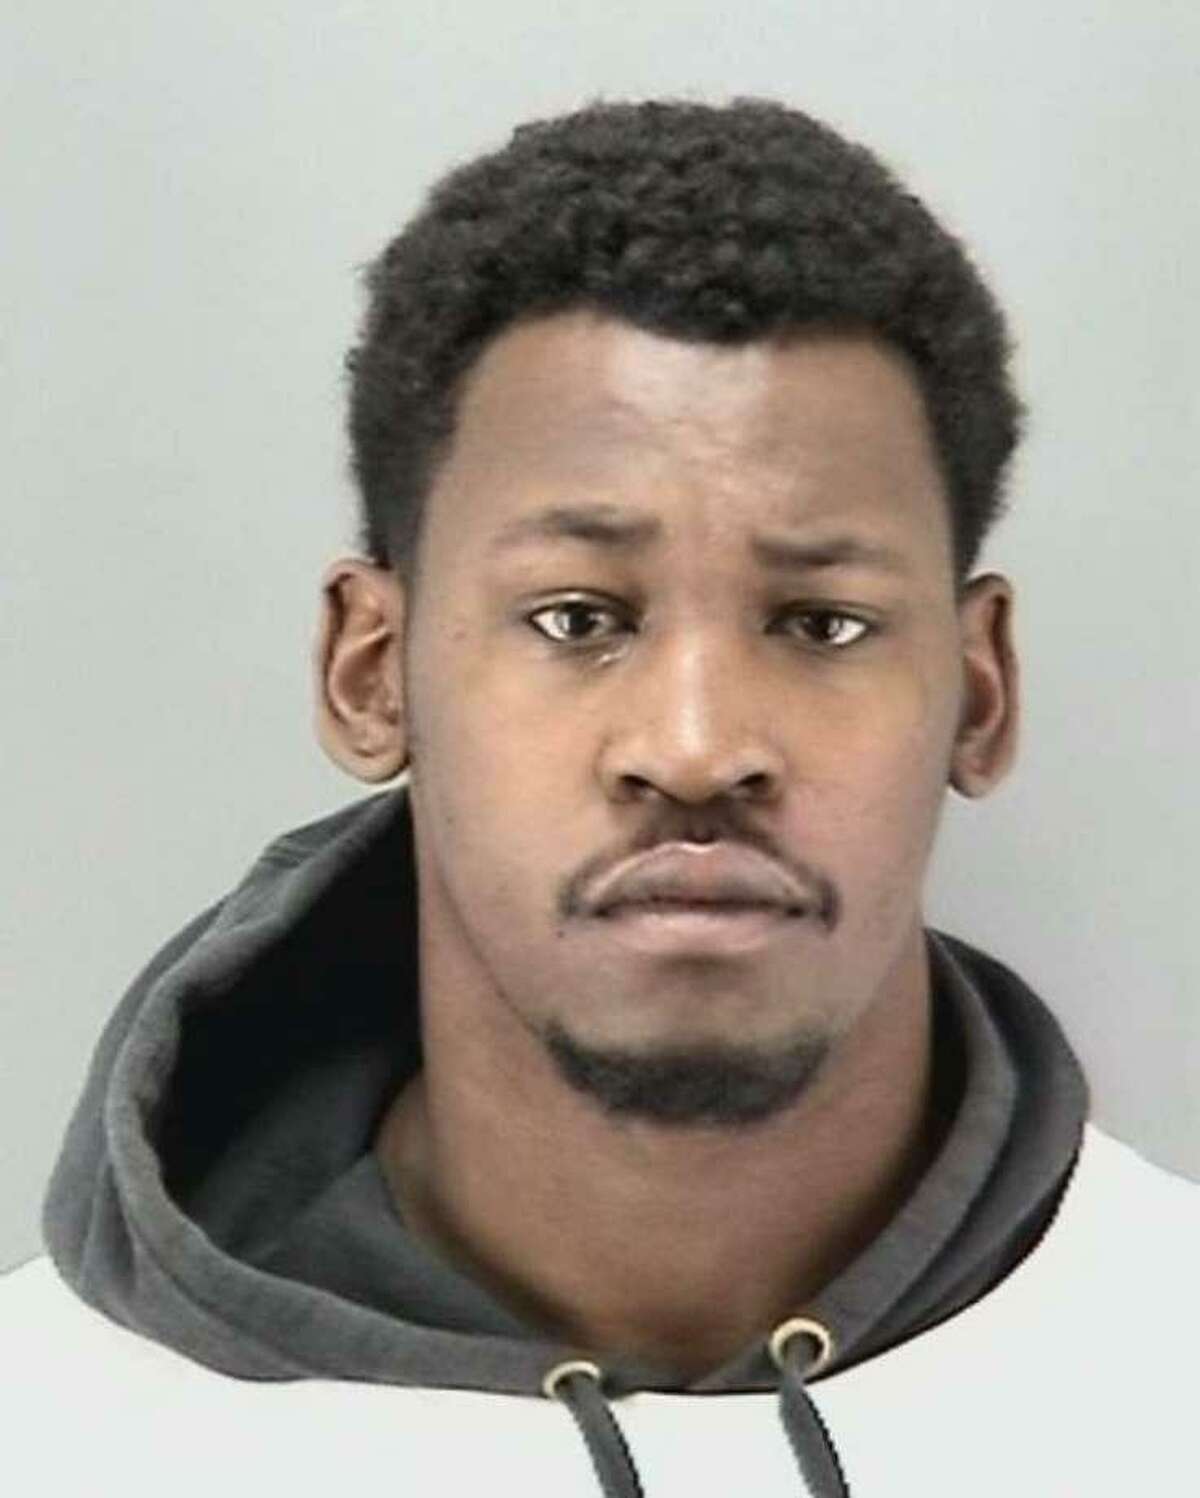 Aldon Smith, 28, was arrested on Friday for violating a court order. Prosecutors said he had a blood alcohol content of .40 when he showed up at the San Francisco Sheriff’s Department on Friday to be fitted with alcohol and GPS monitors.